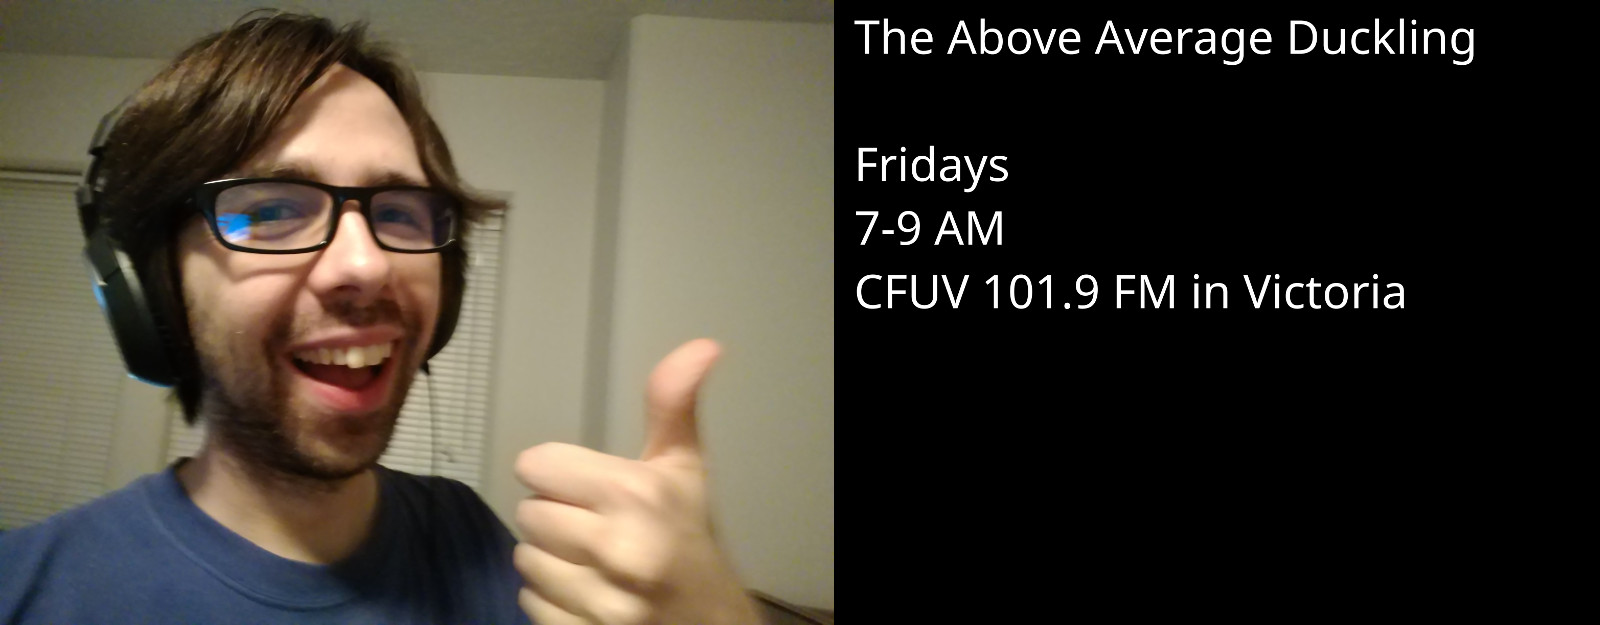 The Above Average Duckling: Fridays from 7-9 AM on CFUV 101.9 FM in Victoria